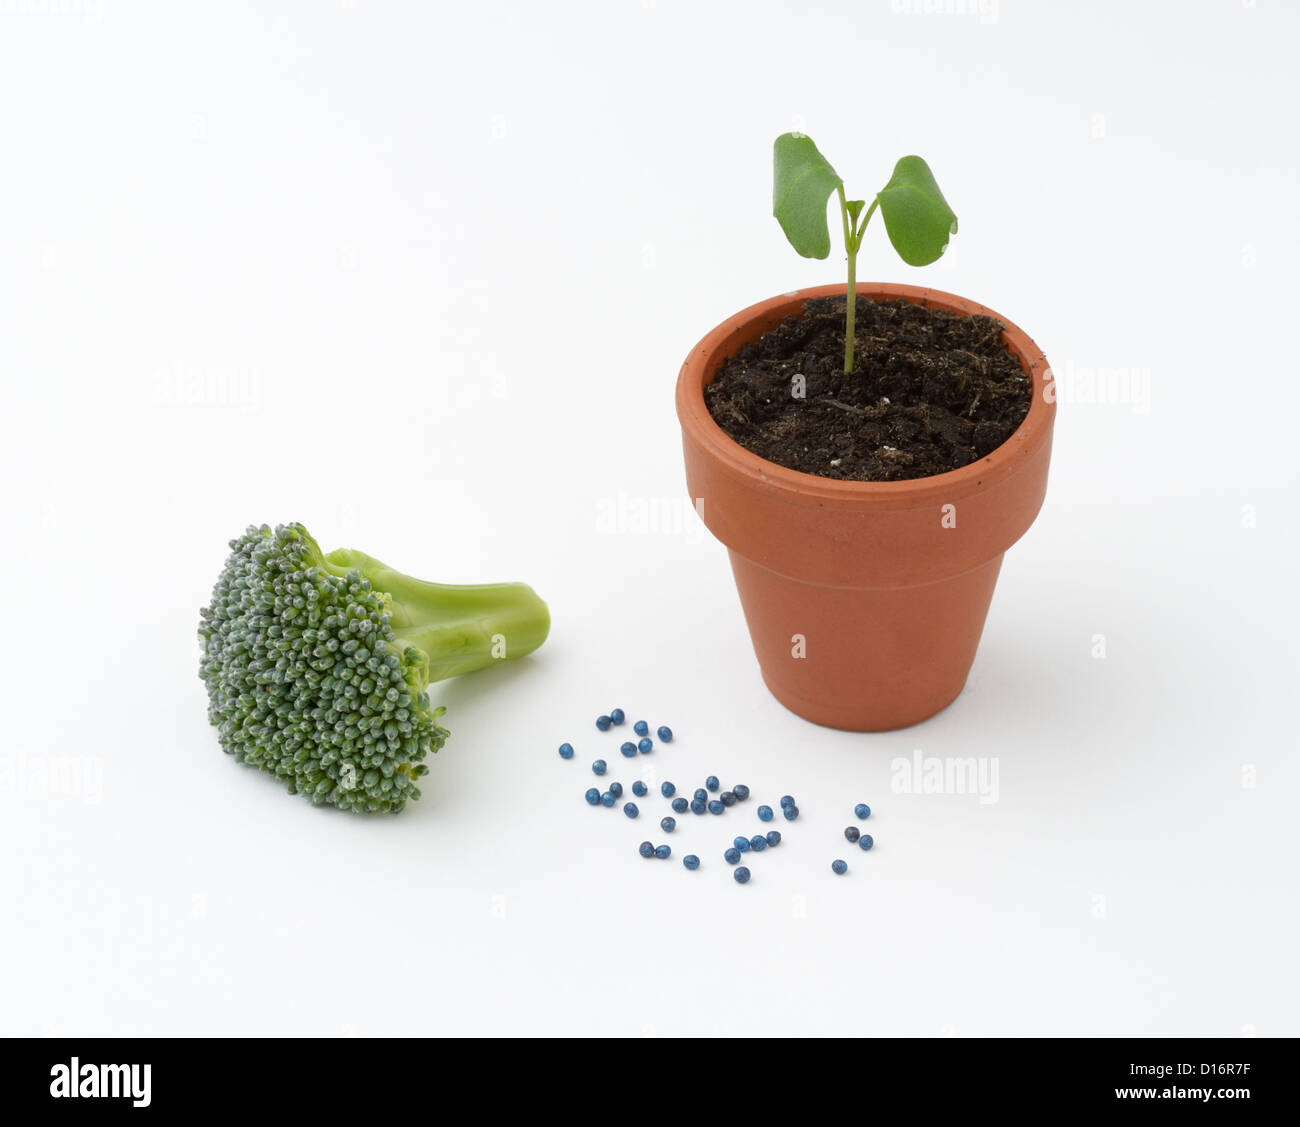 Broccoli seedling plant with flower head and seeds Stock Photo